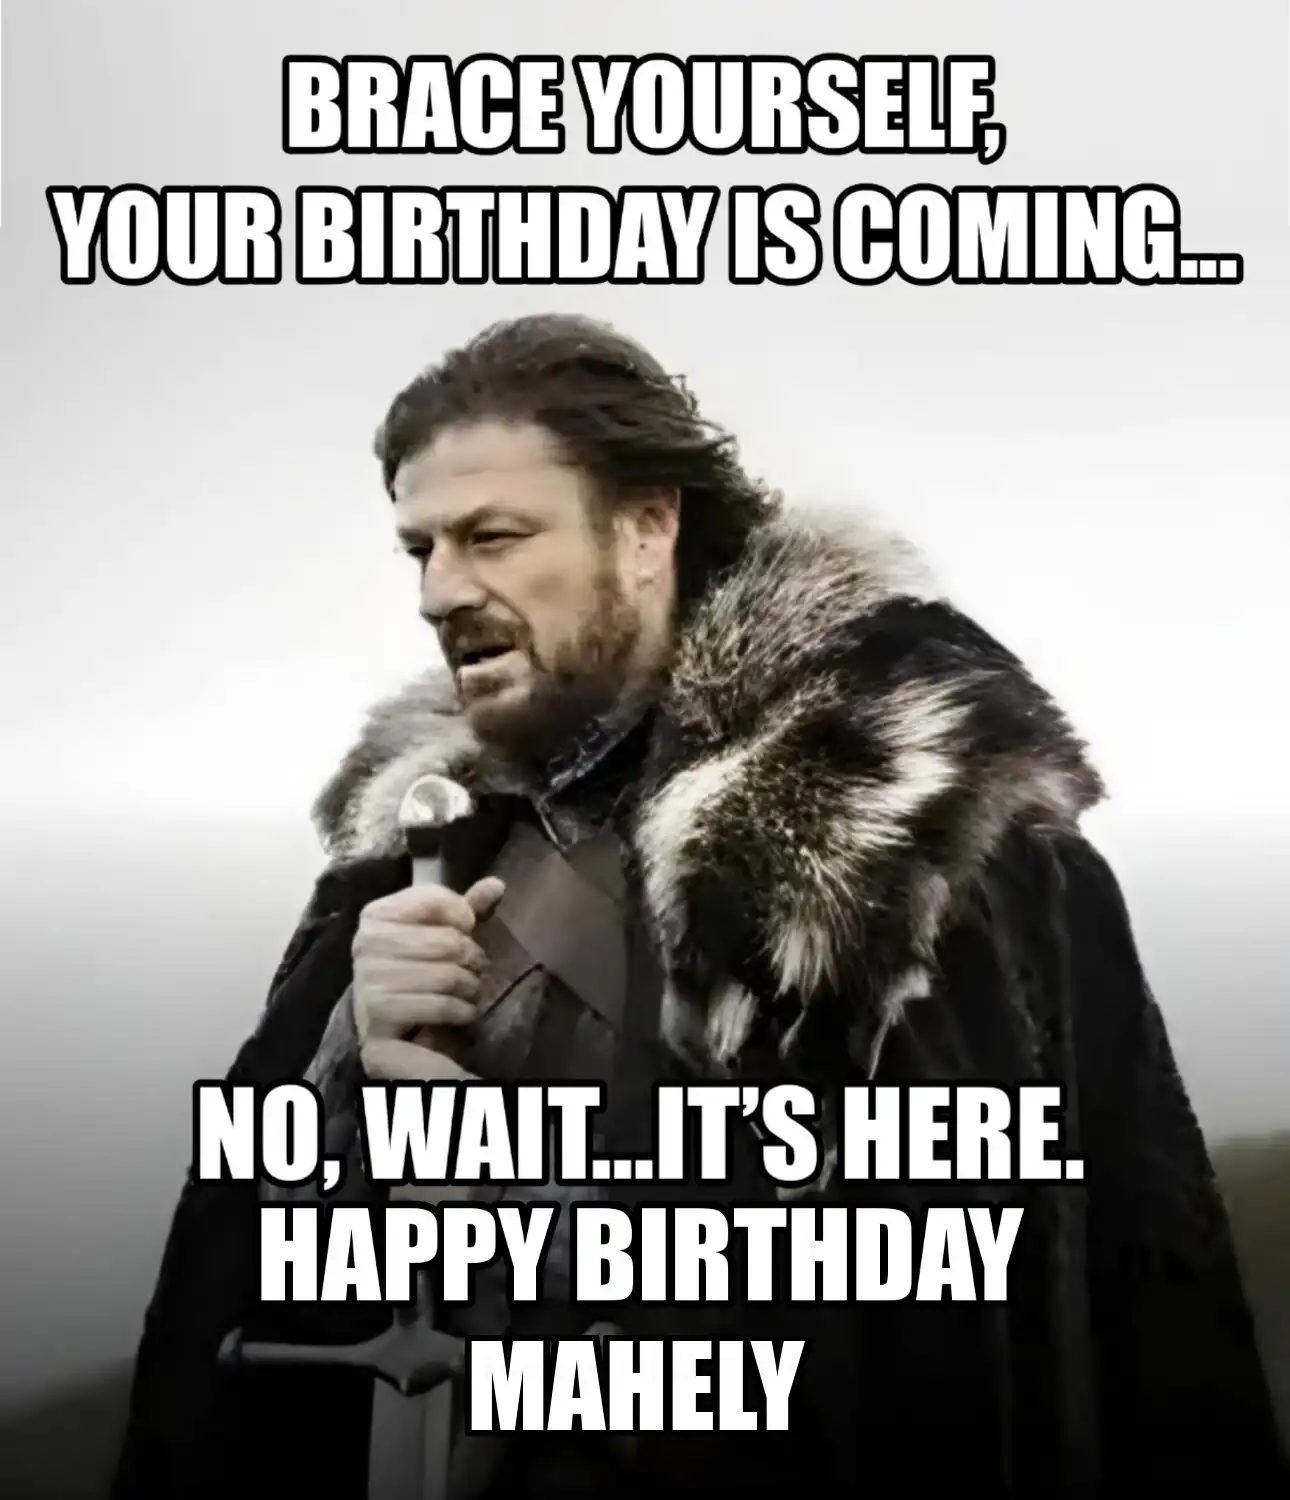 Happy Birthday Mahely Brace Yourself Your Birthday Is Coming Meme